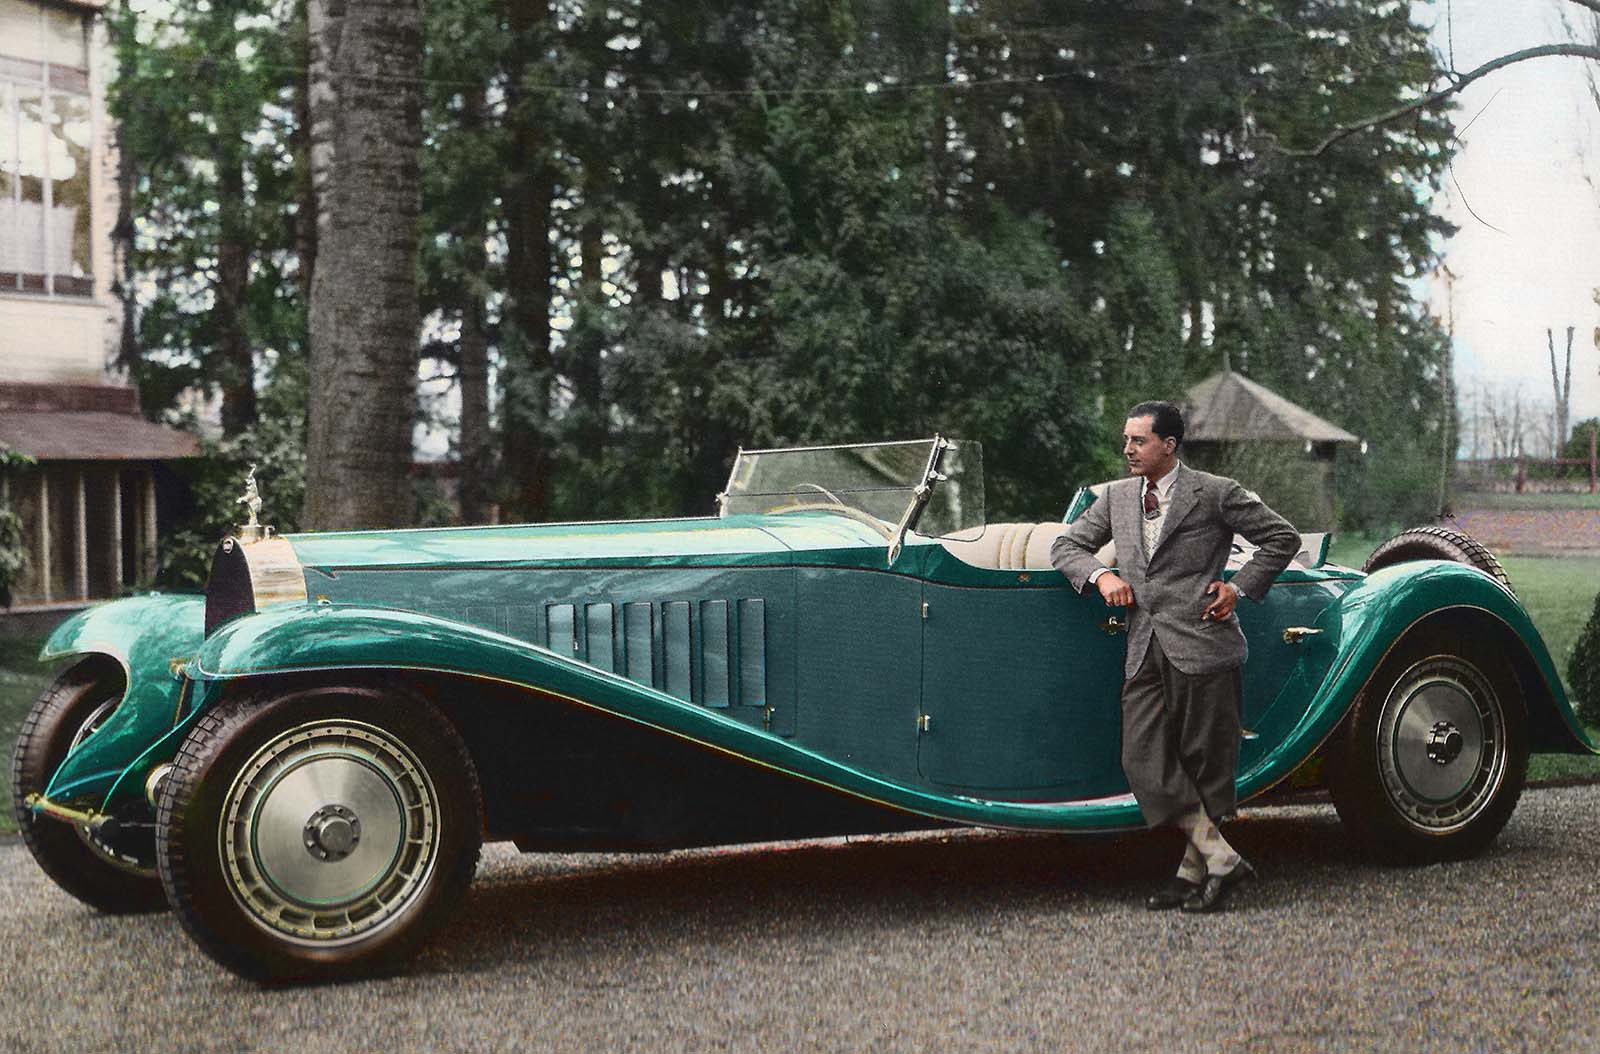 Stunning Vintage Photos of Bugatti Cars in the 1920s and 1930s